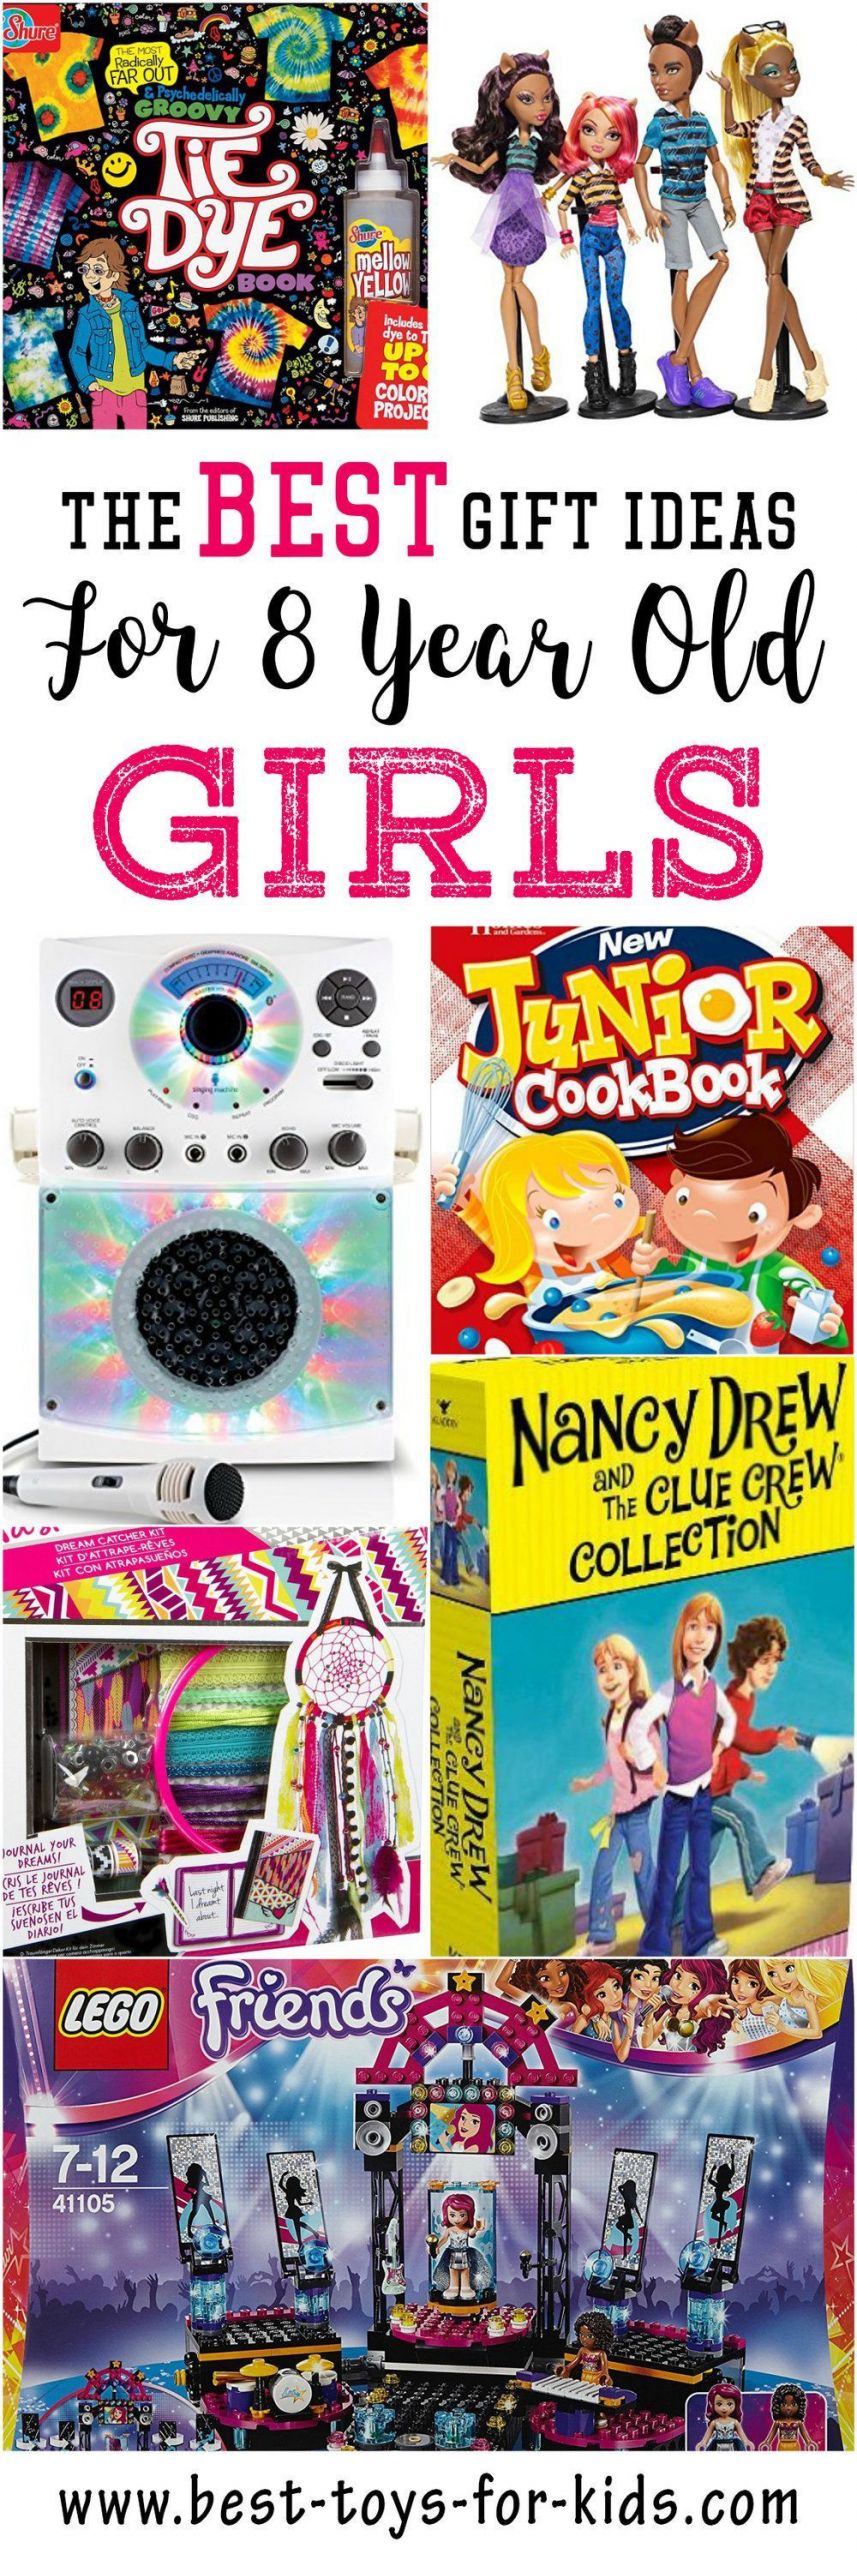 Gift Ideas For Eight Year Old Girls
 best t ideas for 8 year old girls